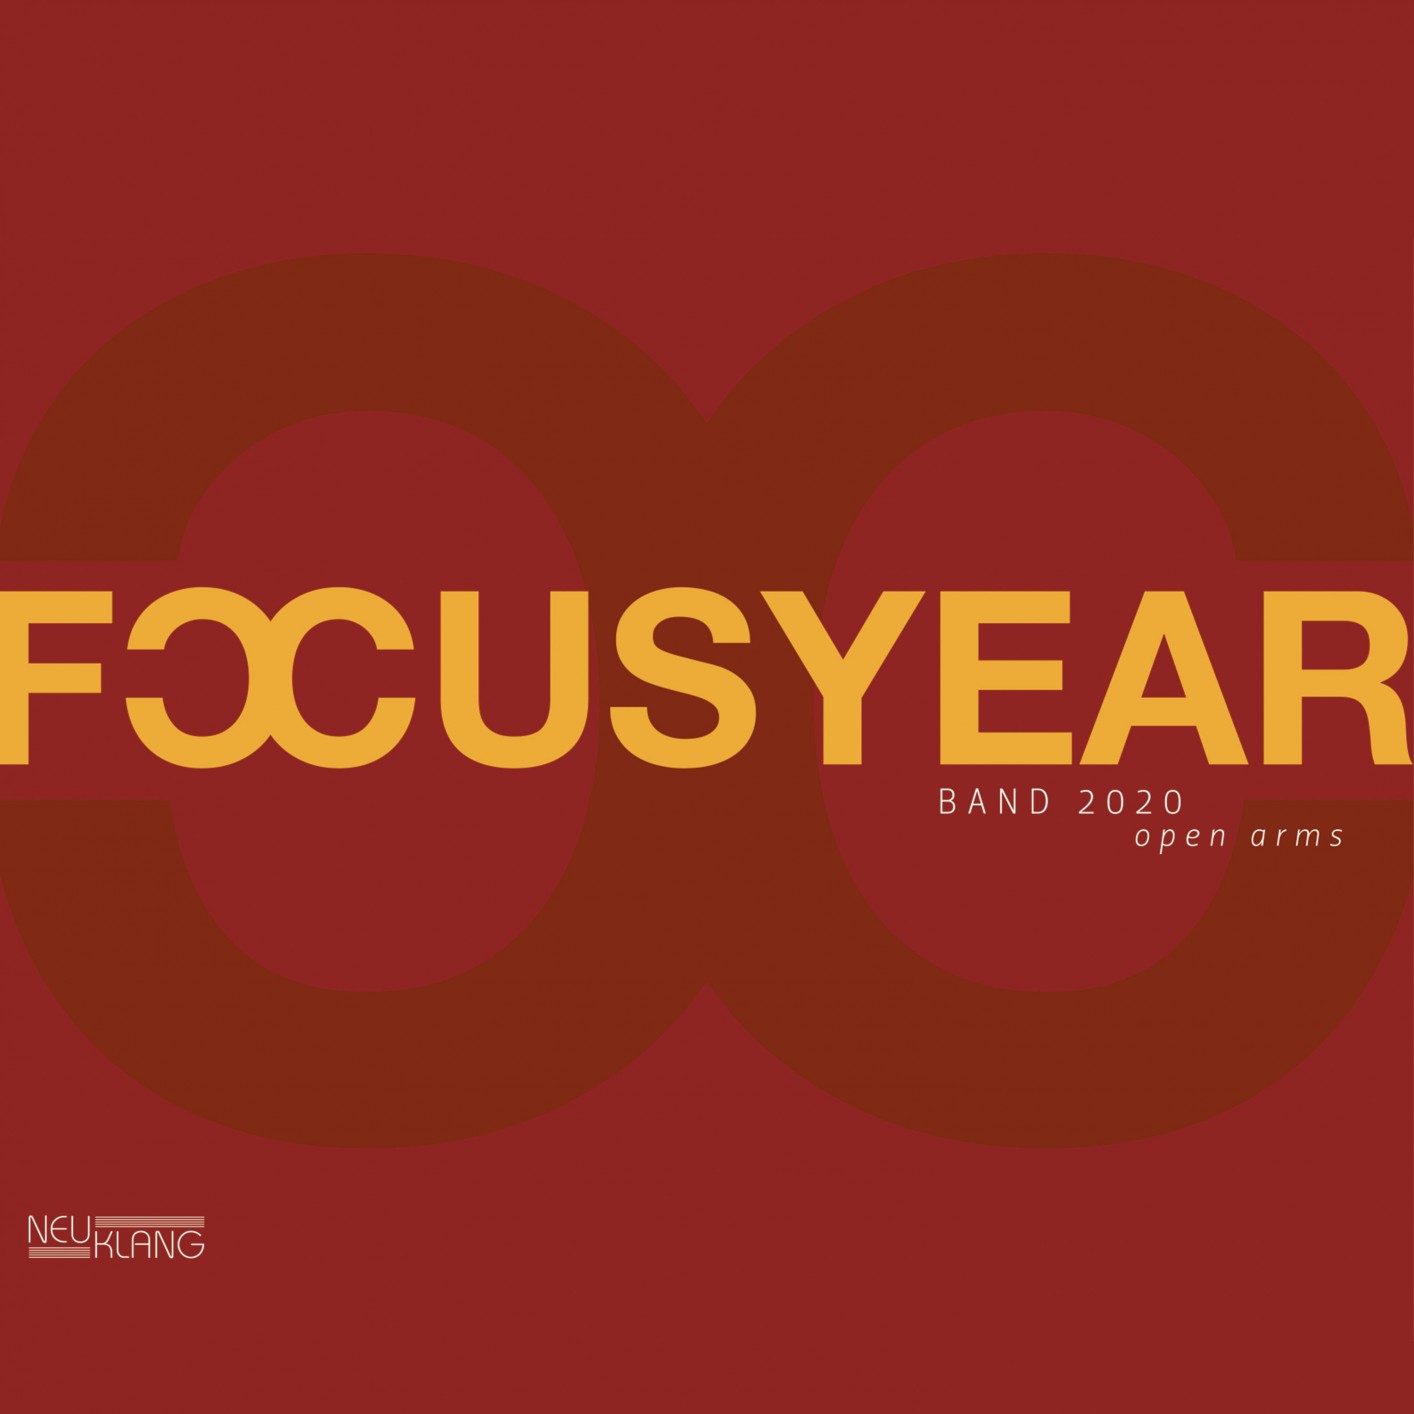 Focusyear Band - Arms Open (2020) [FLAC 24bit/48kHz]